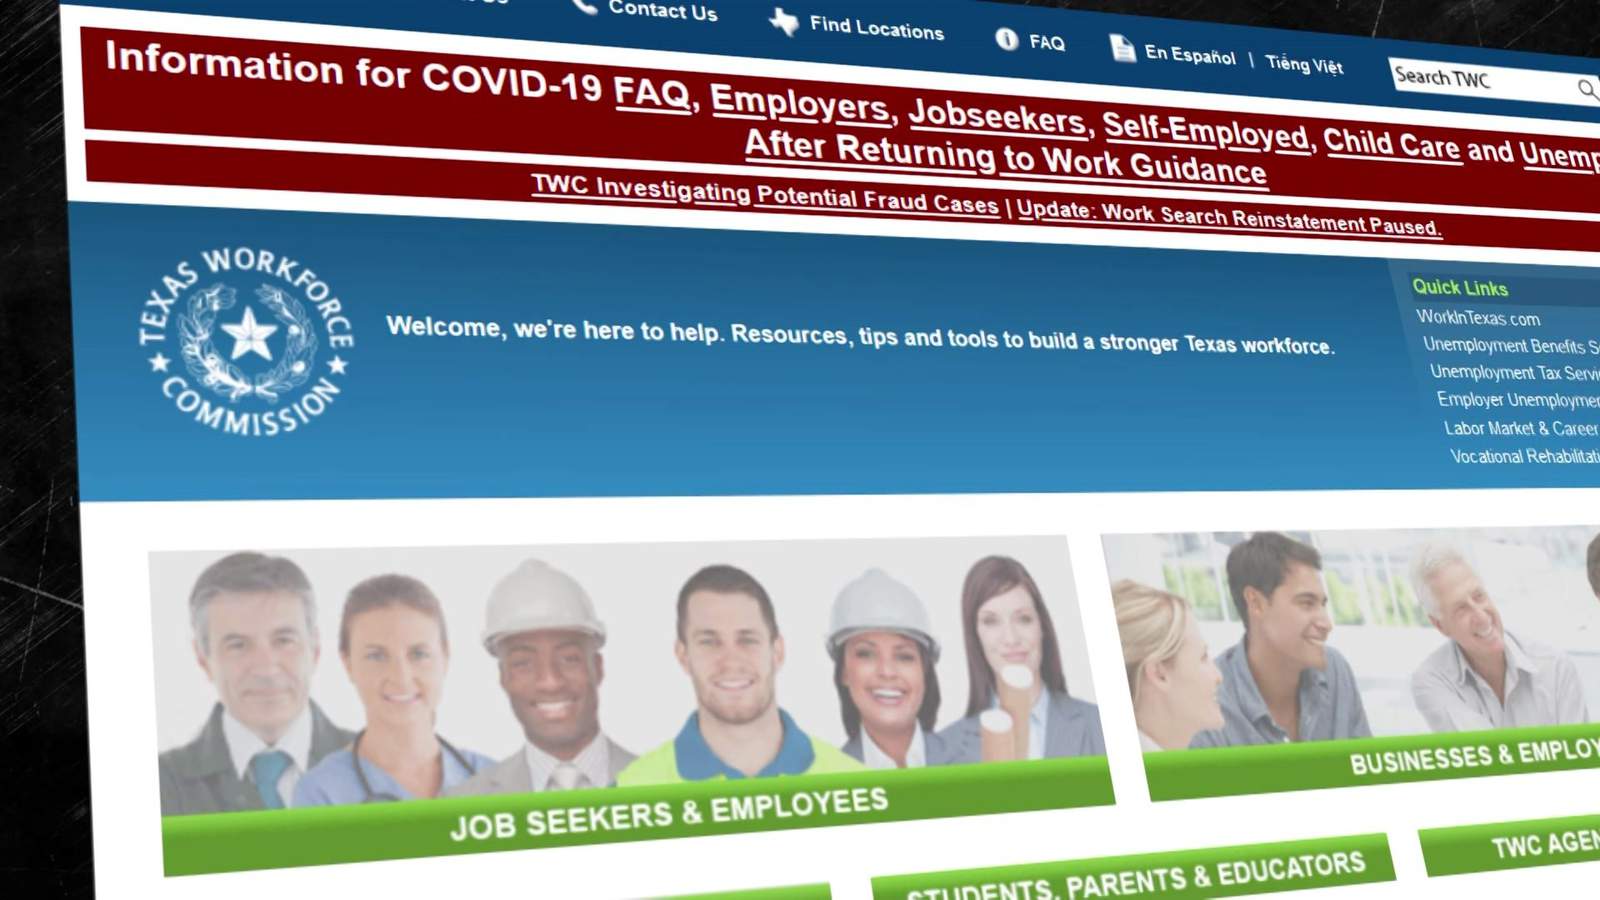 Texas Workforce Commission cuts unemployment benefits for some after claim of overpayment